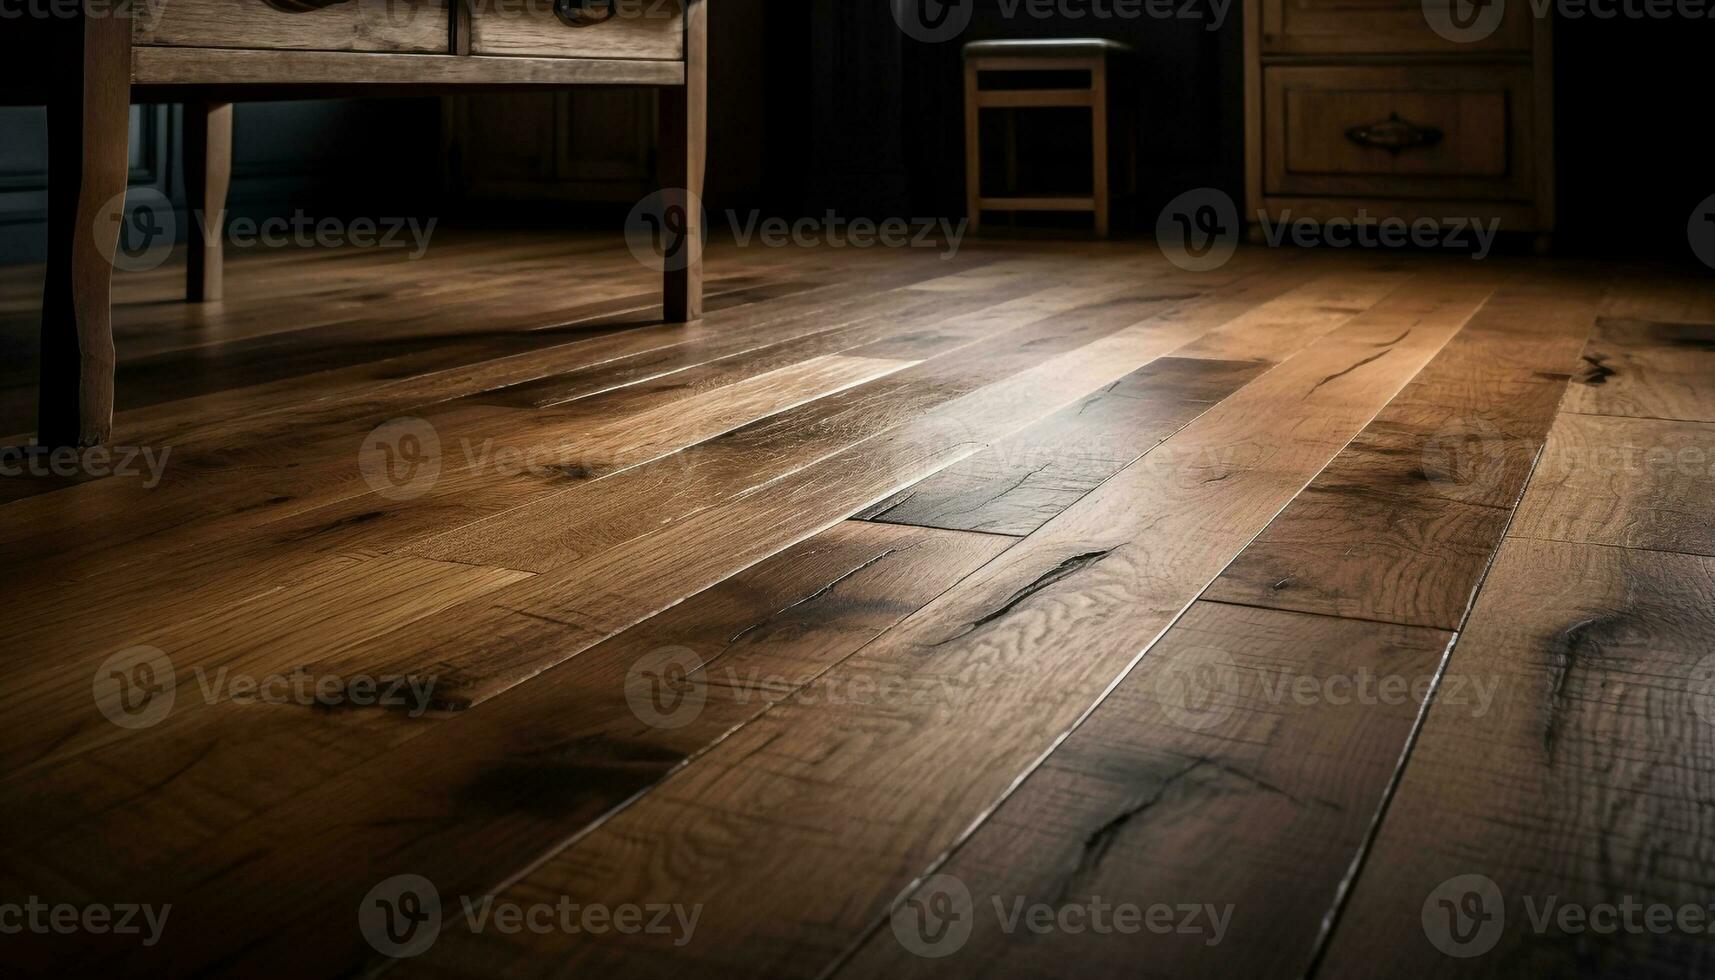 Modern design, elegant hardwood flooring, rustic table, clean and comfortable generated by AI photo